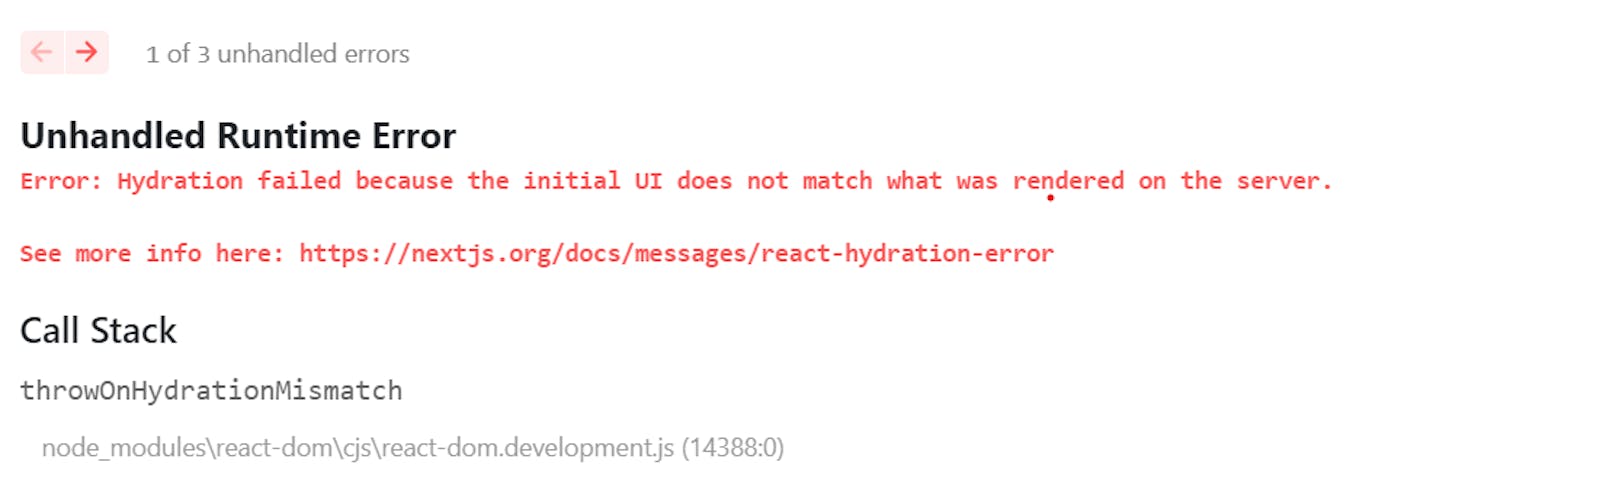 Fix hydration error by this npm package